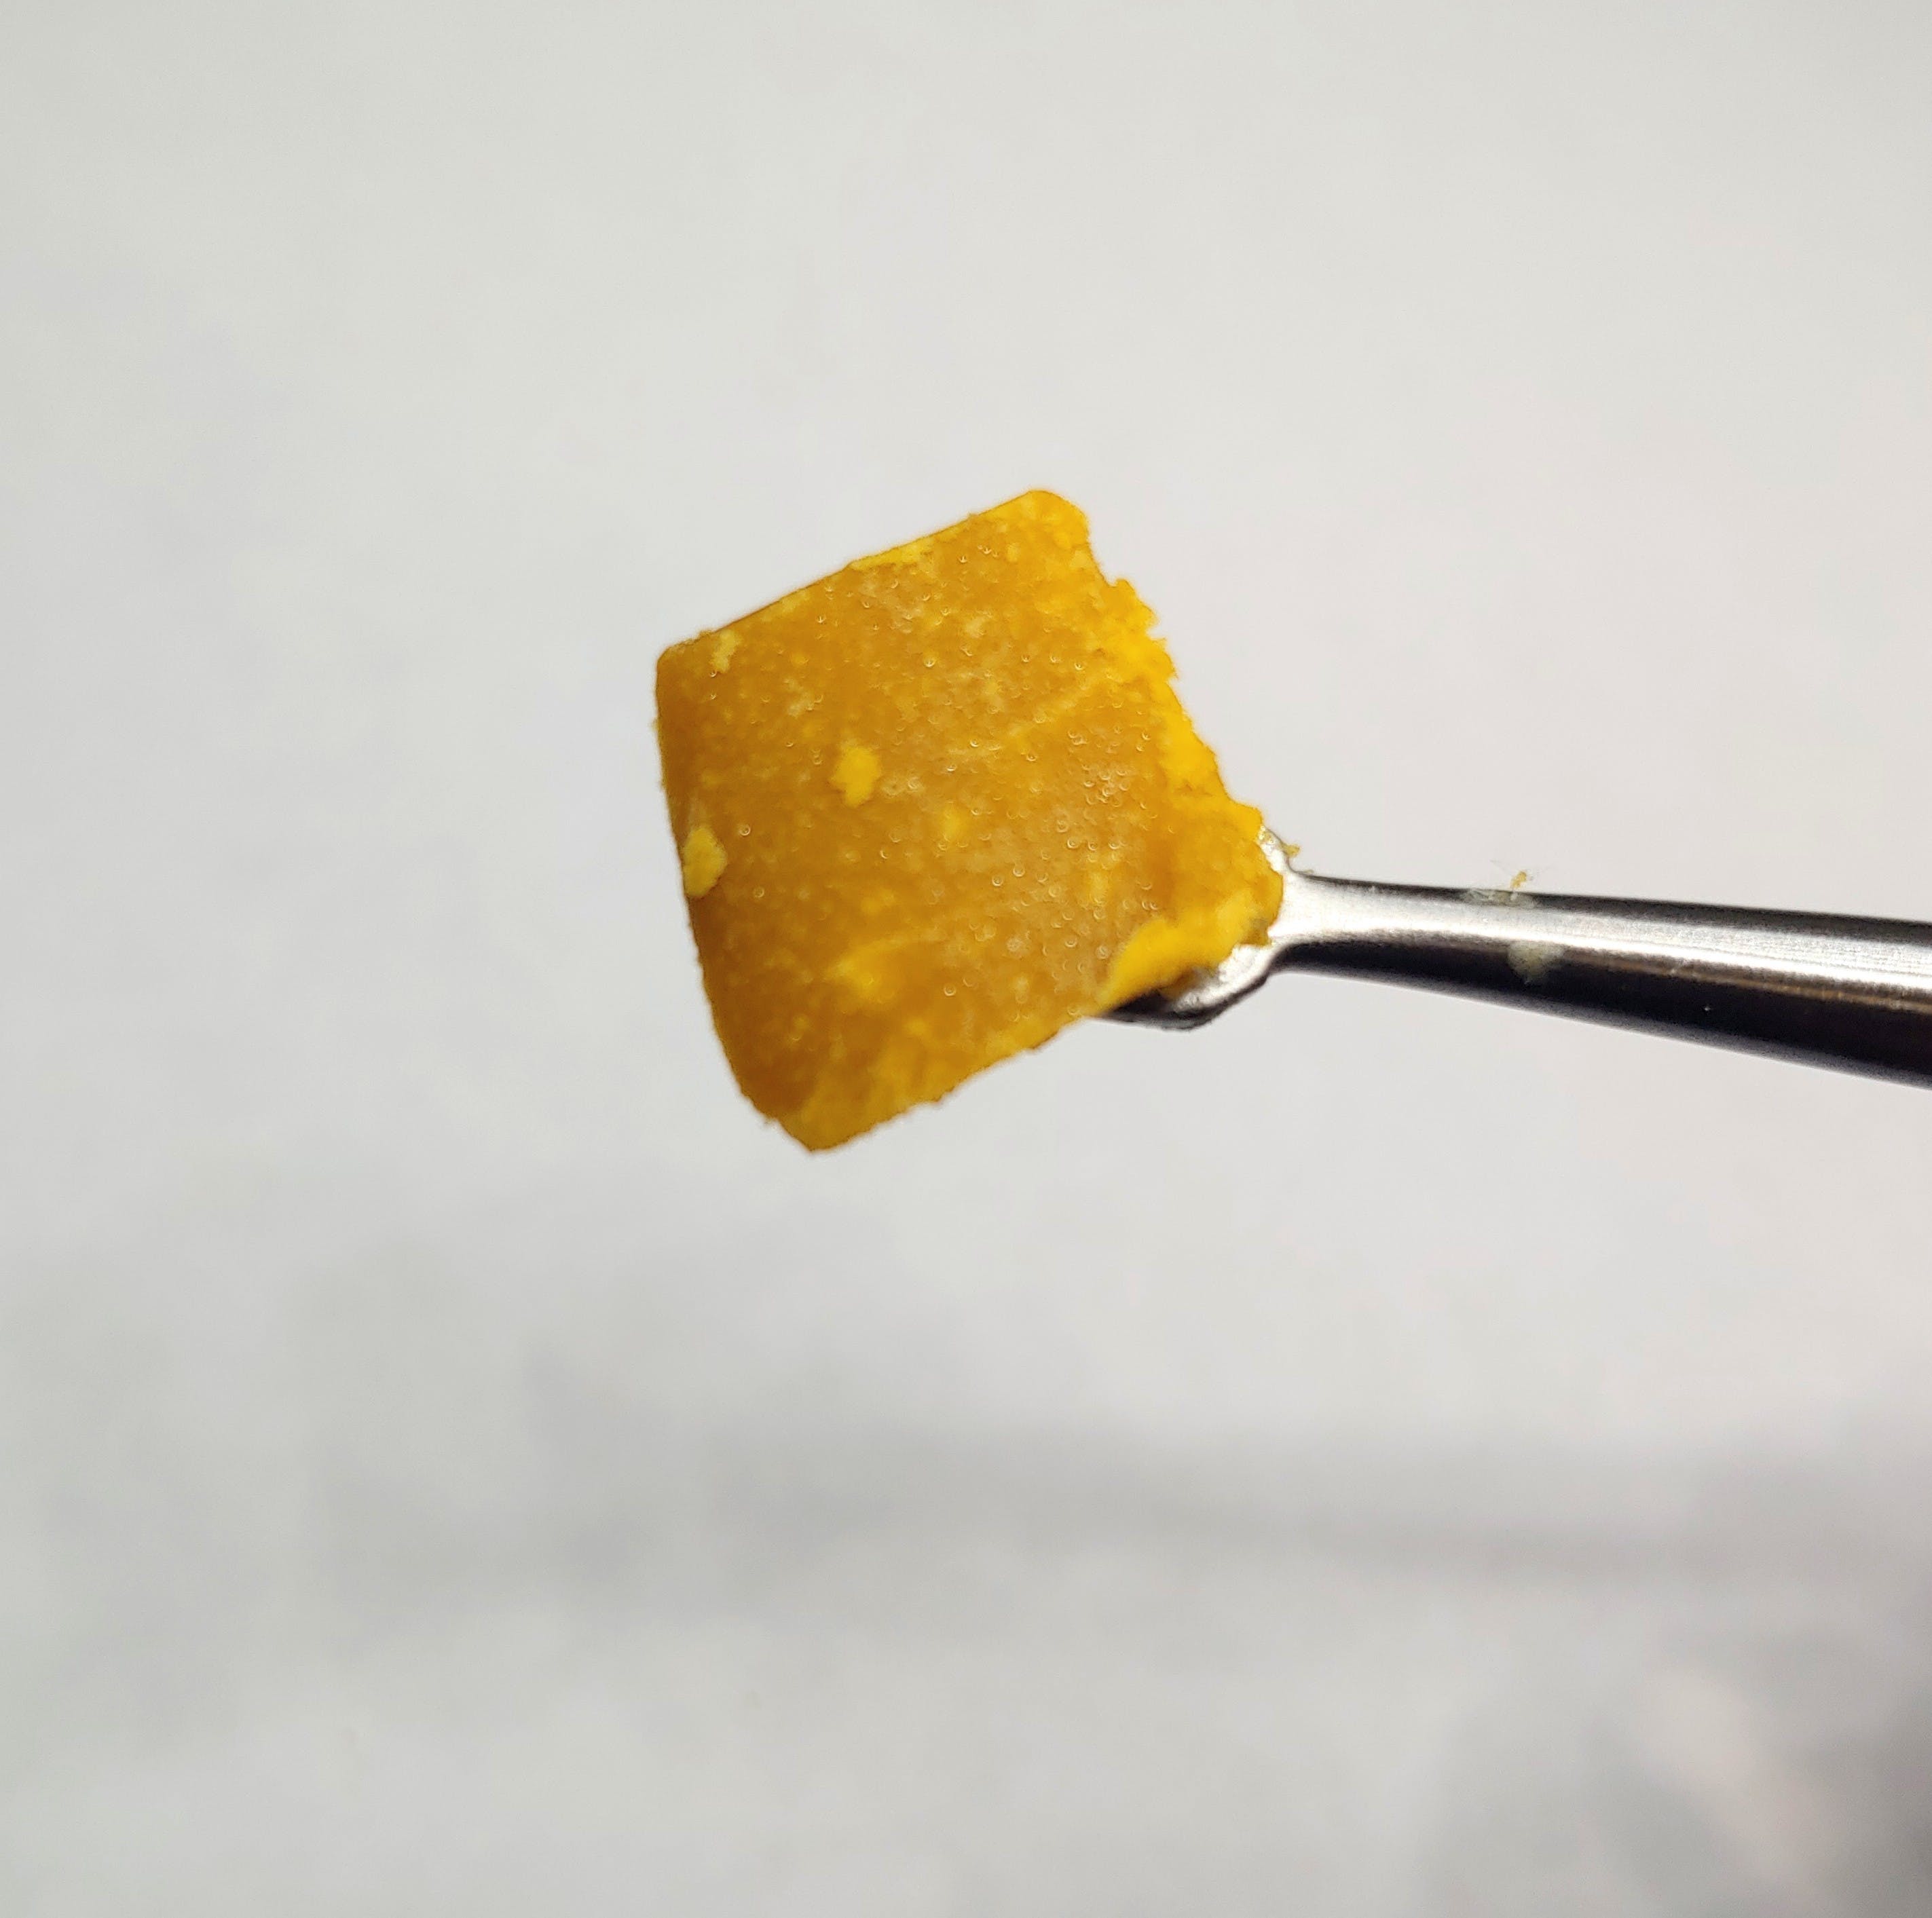 concentrate-wax-dawg-gone-tangilope